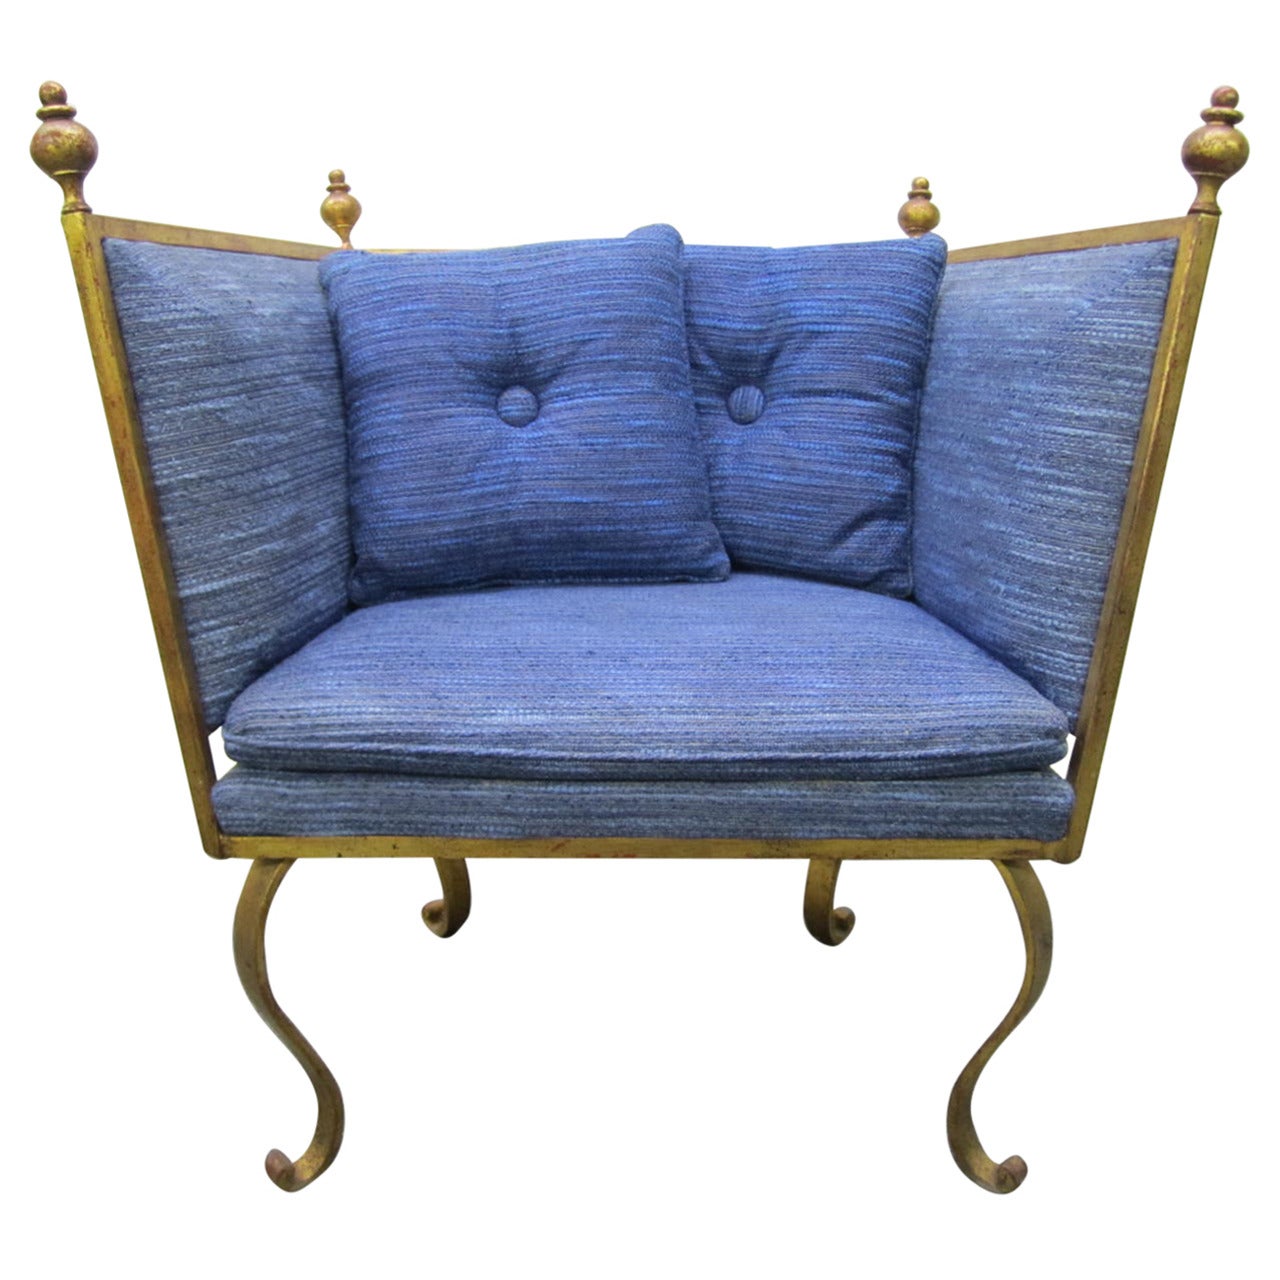 Sensational Spanish Style Gilded Metal Occasional Chair Mid-century Modern